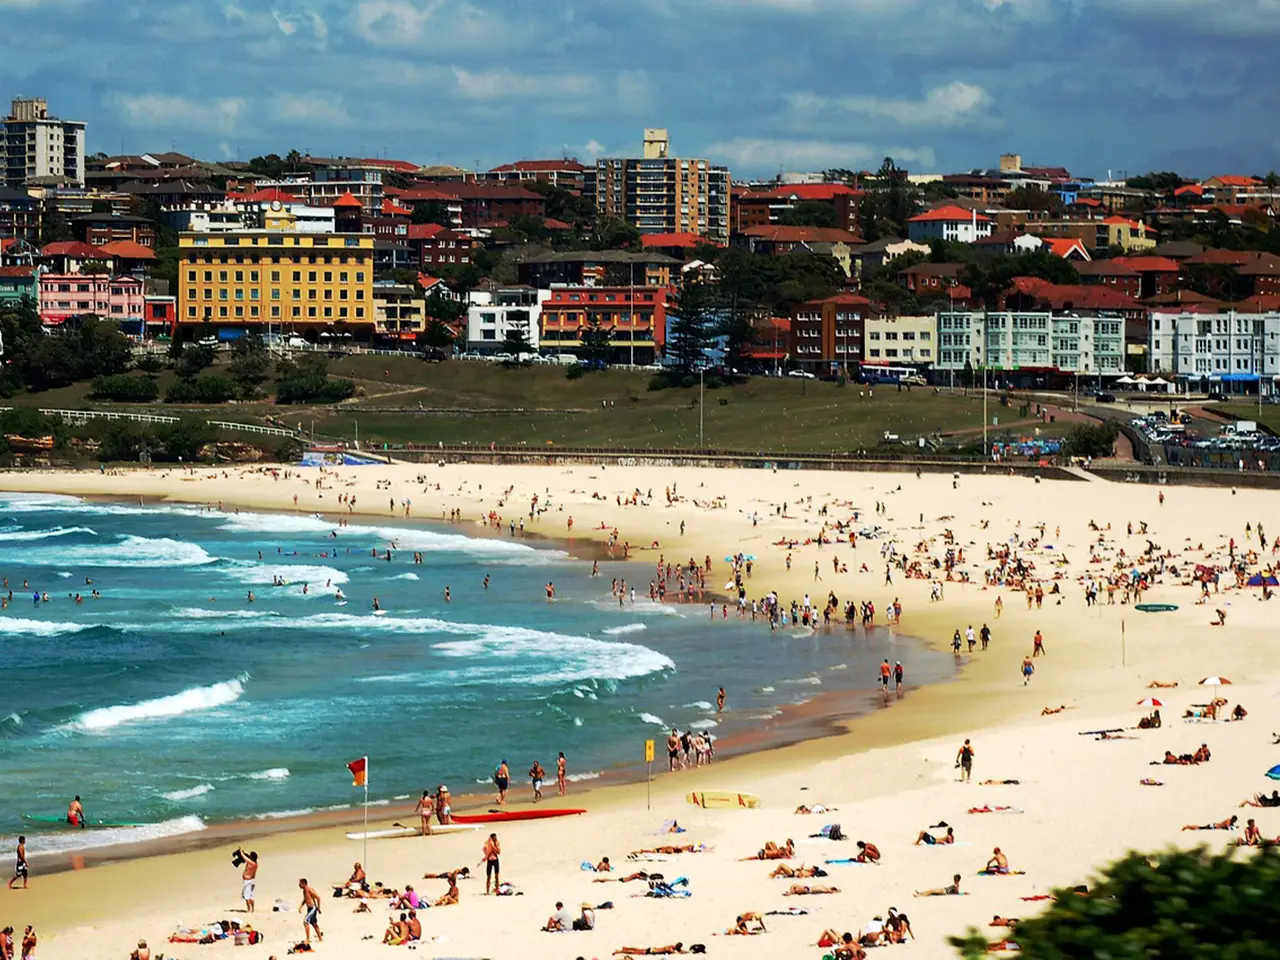 Bondi Beach. Few towns in the world can boast of having such a tempting stretch of sand and sea so close by. It makes sense that it's one of Sydney's top beaches.